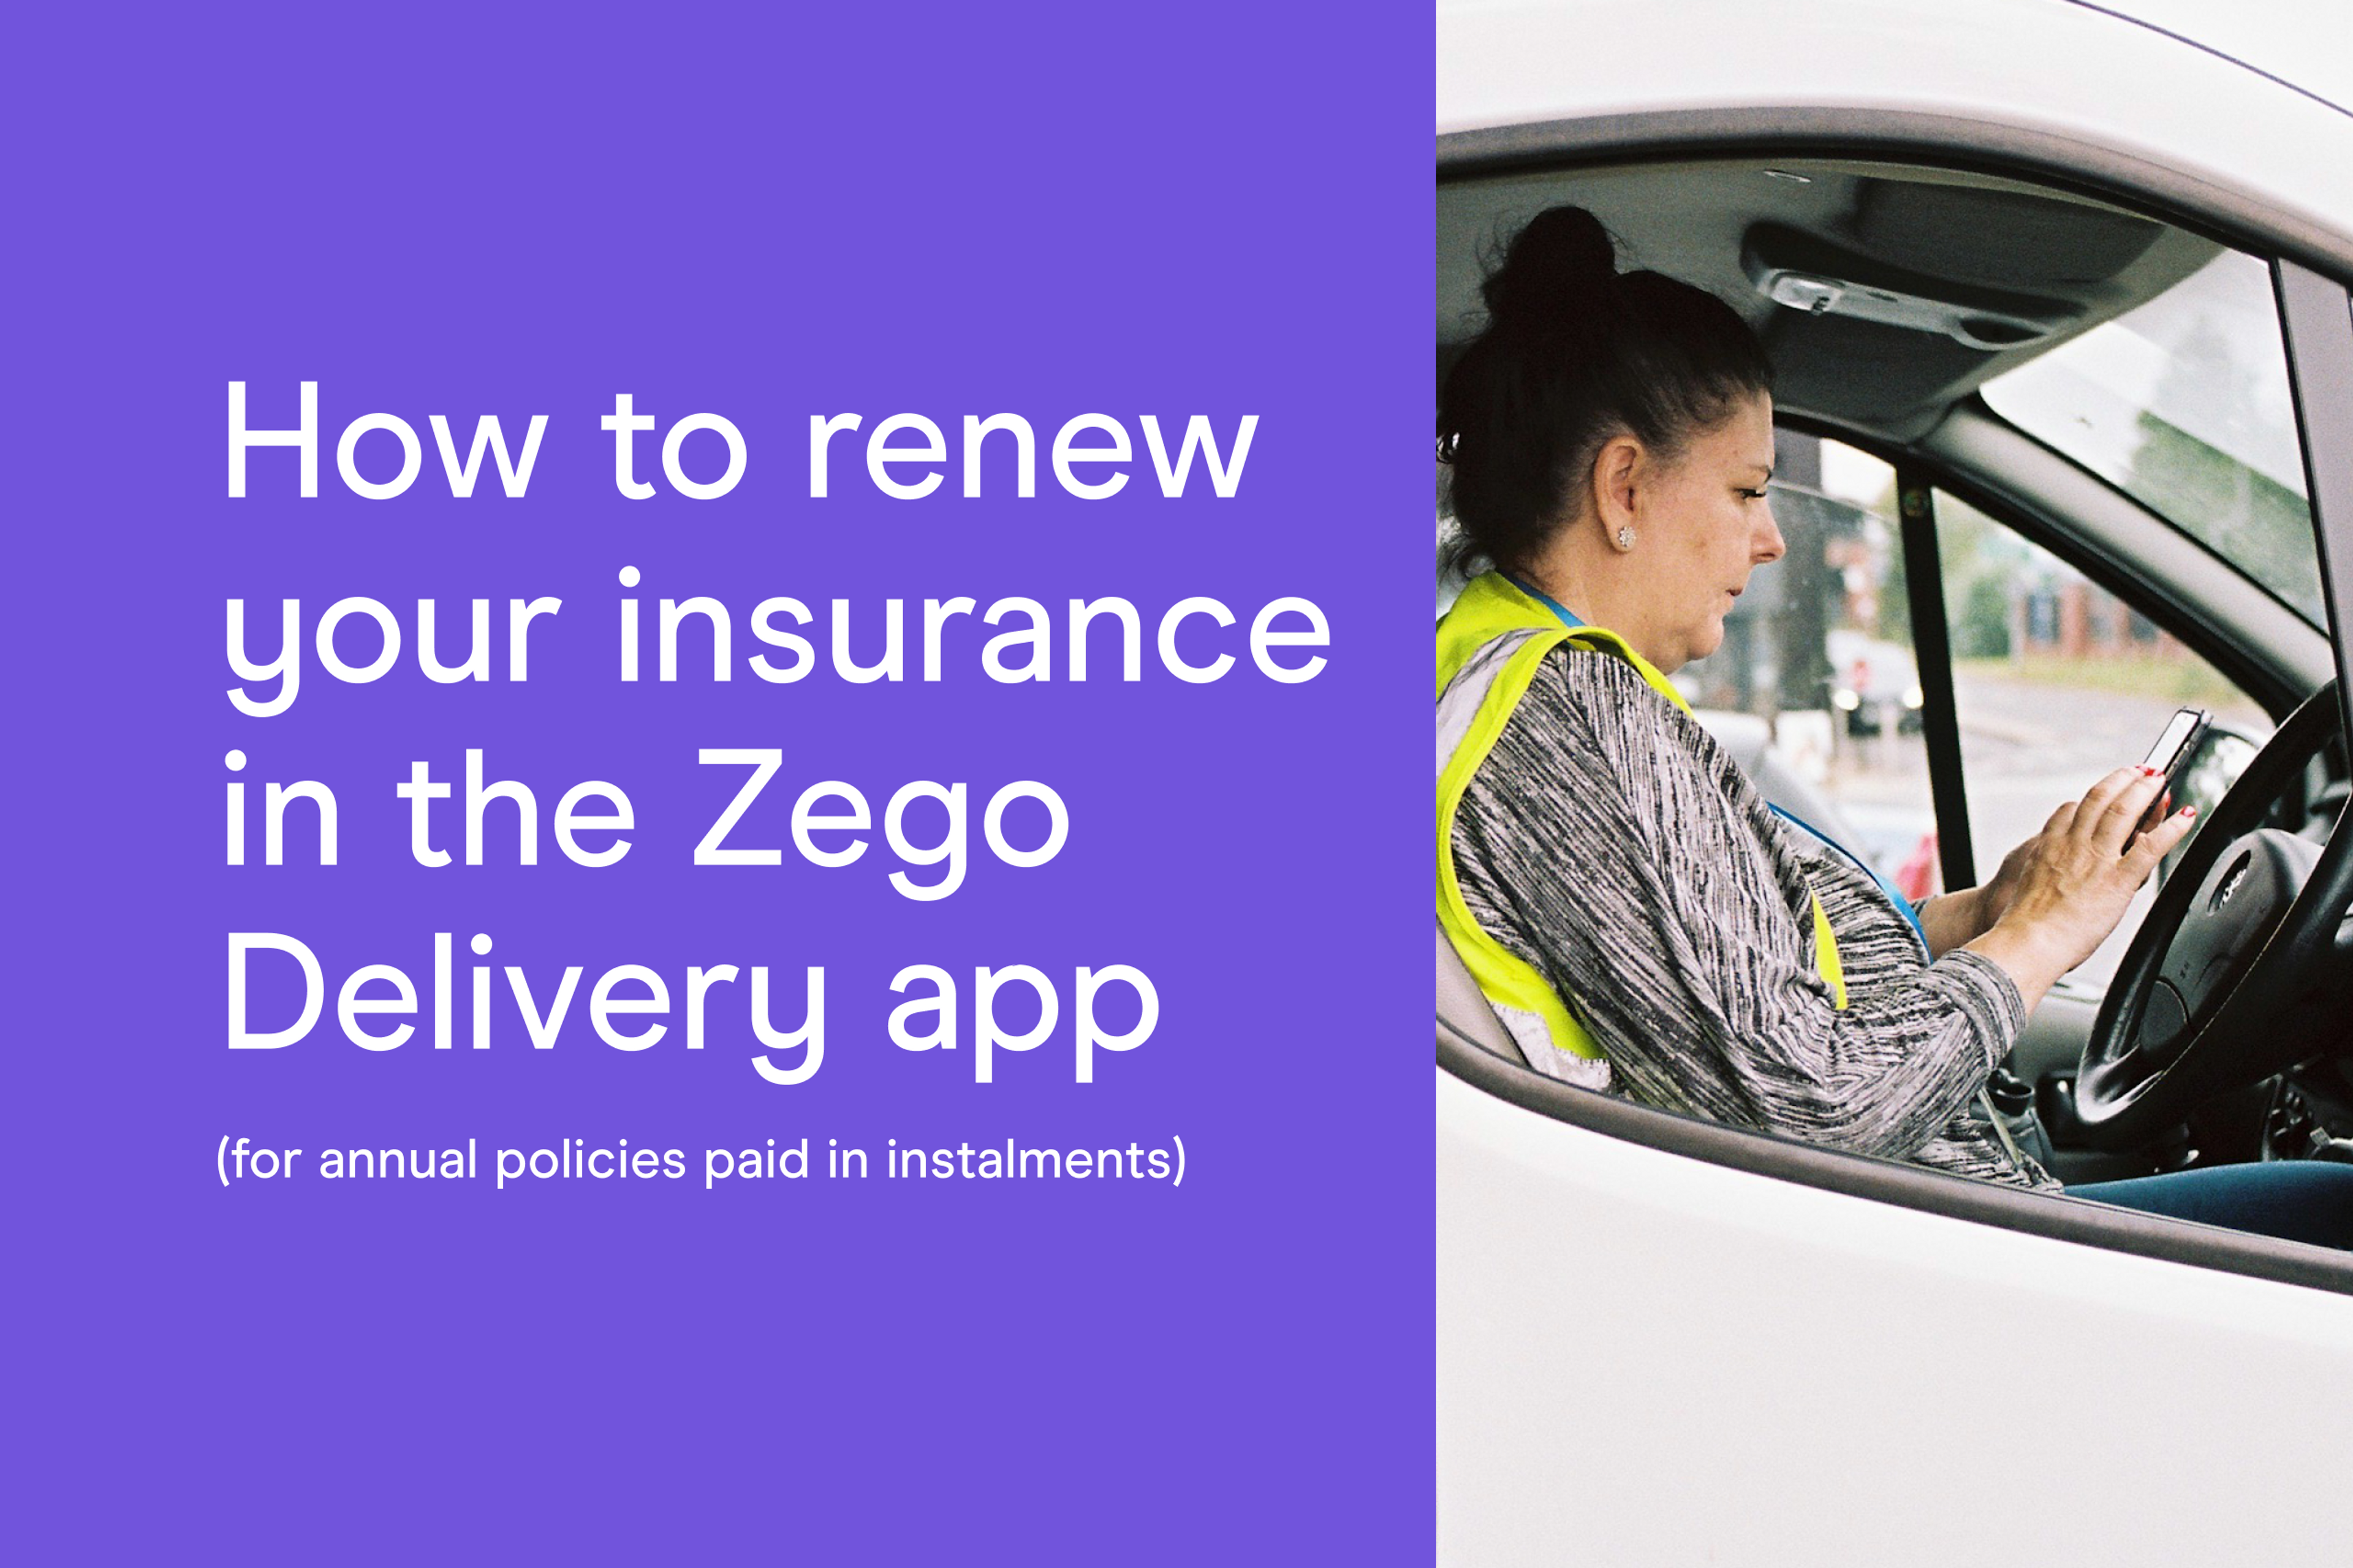 How to renew your insurance in the Zego Delivery app (for annual policies paid in instalments)